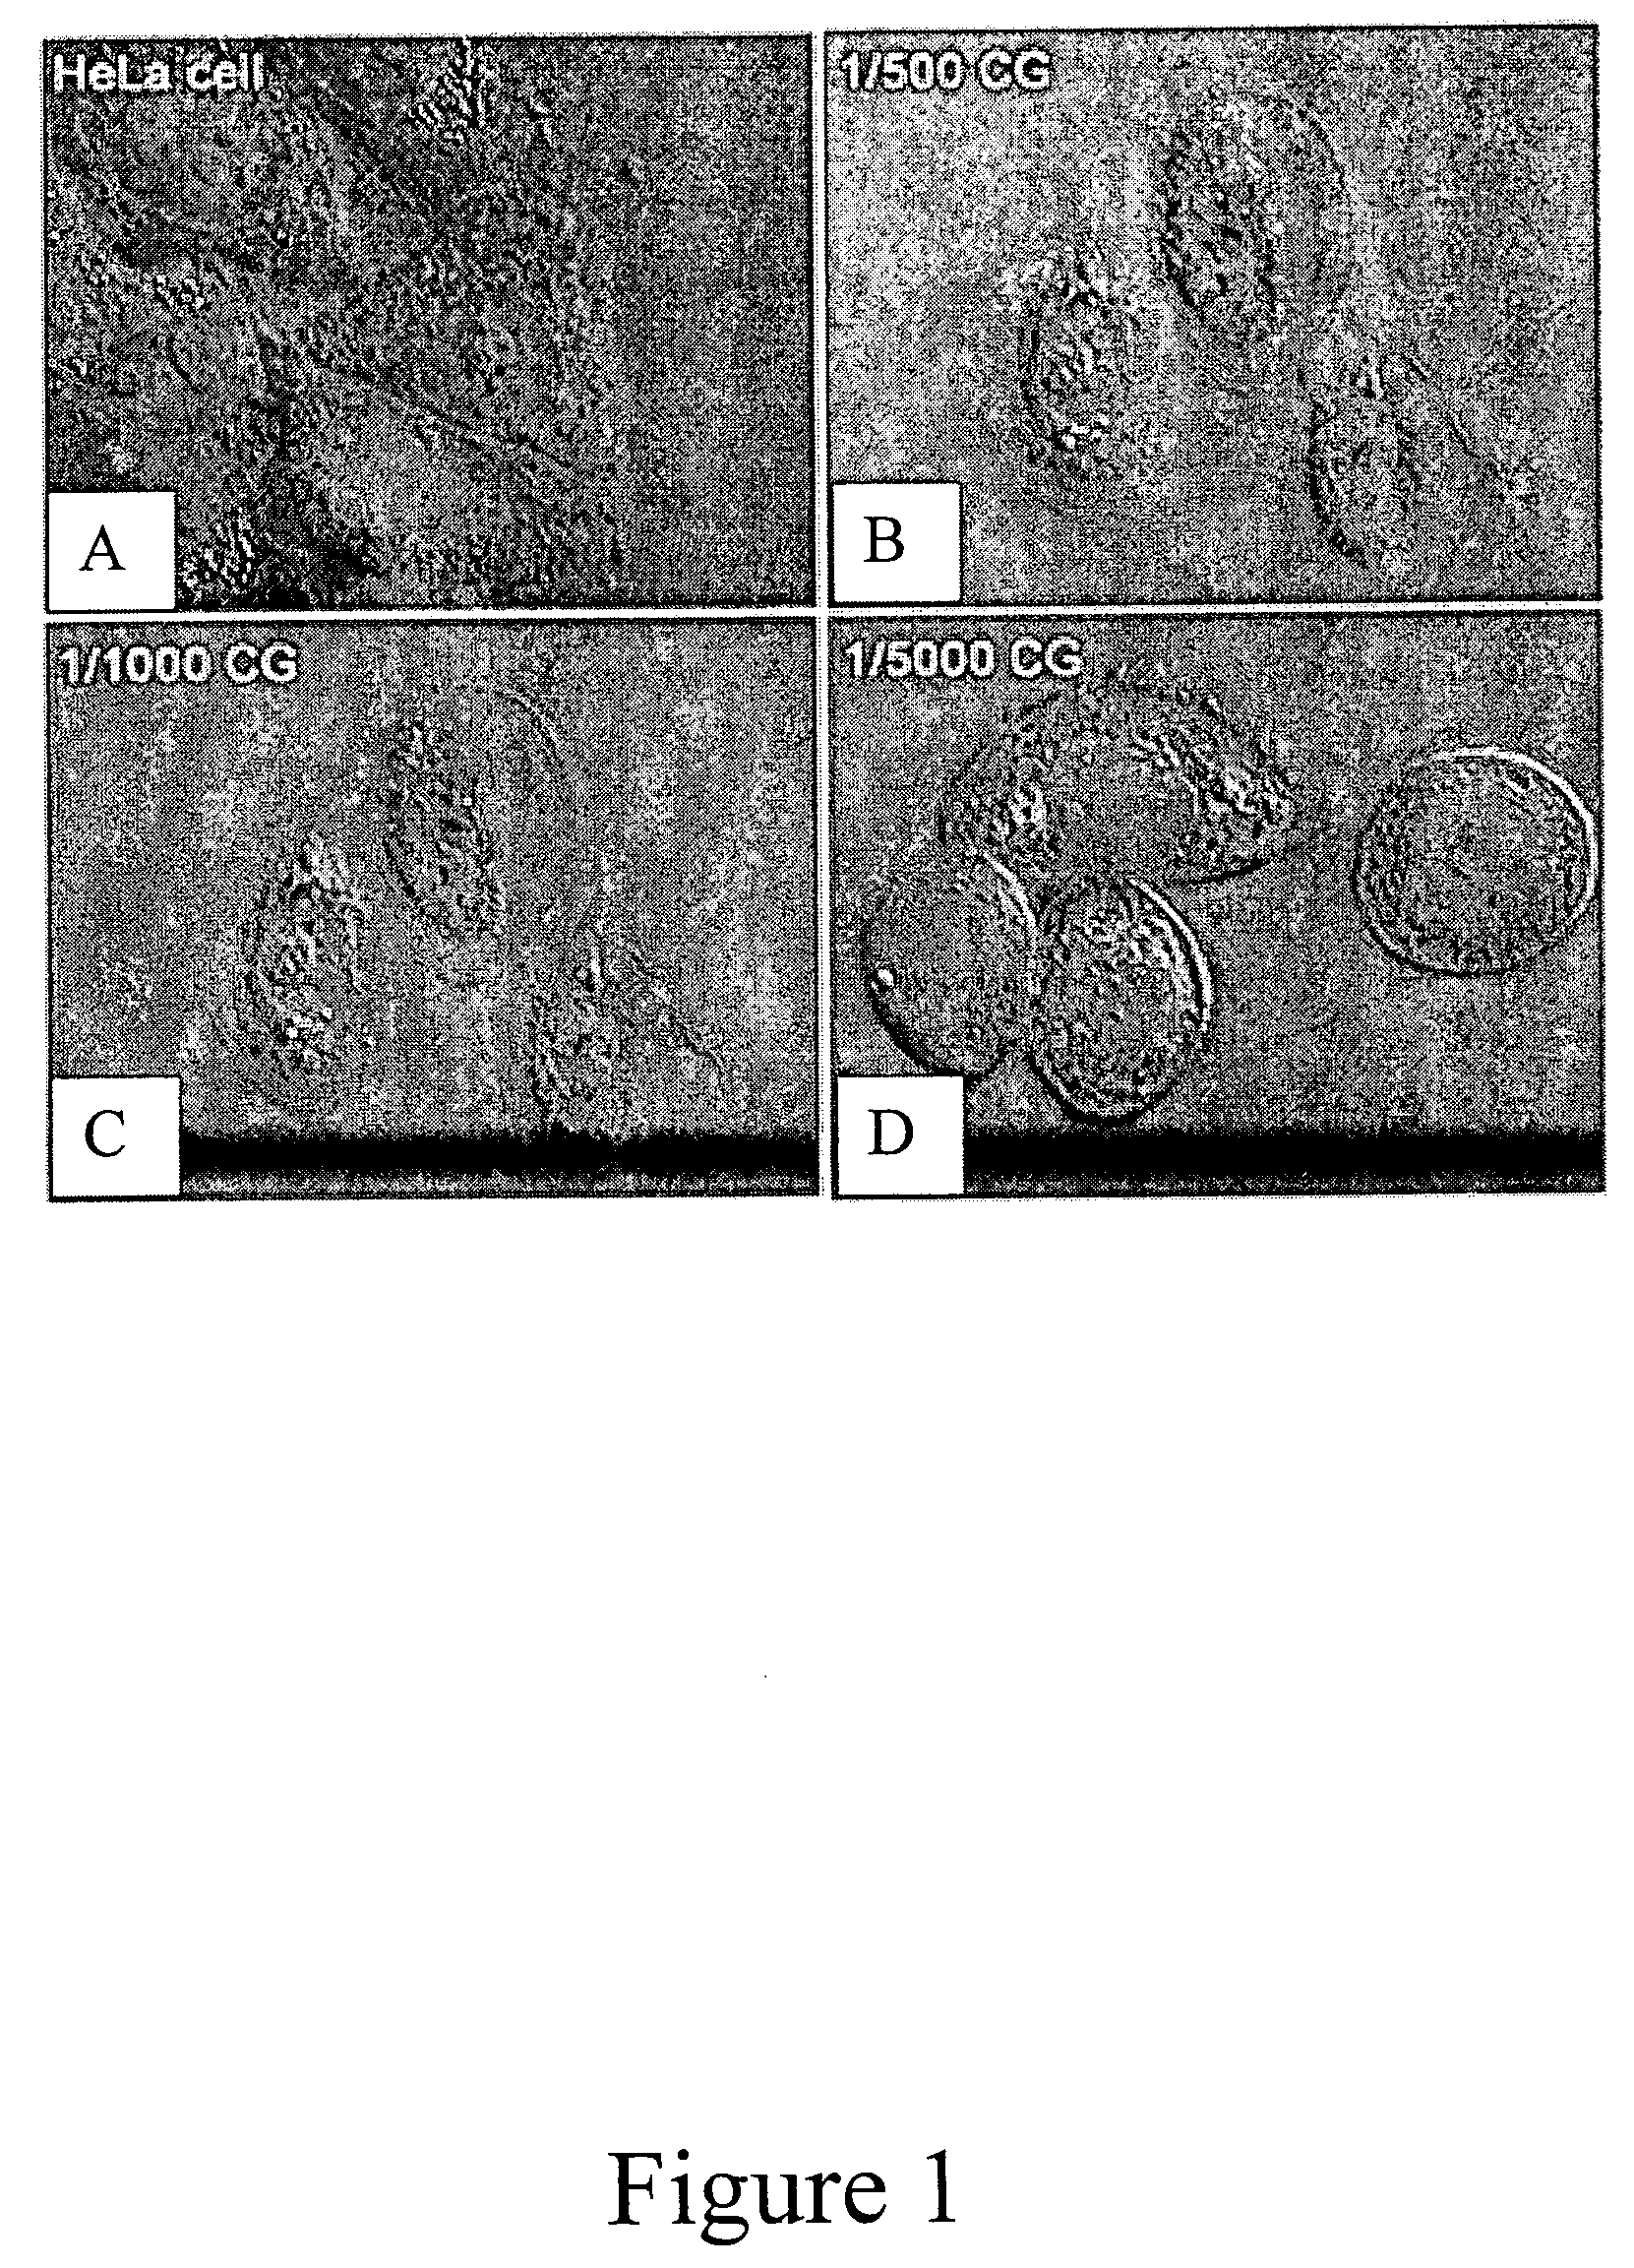 Use of abietic acid and derivatives thereof for inhibiting cancer